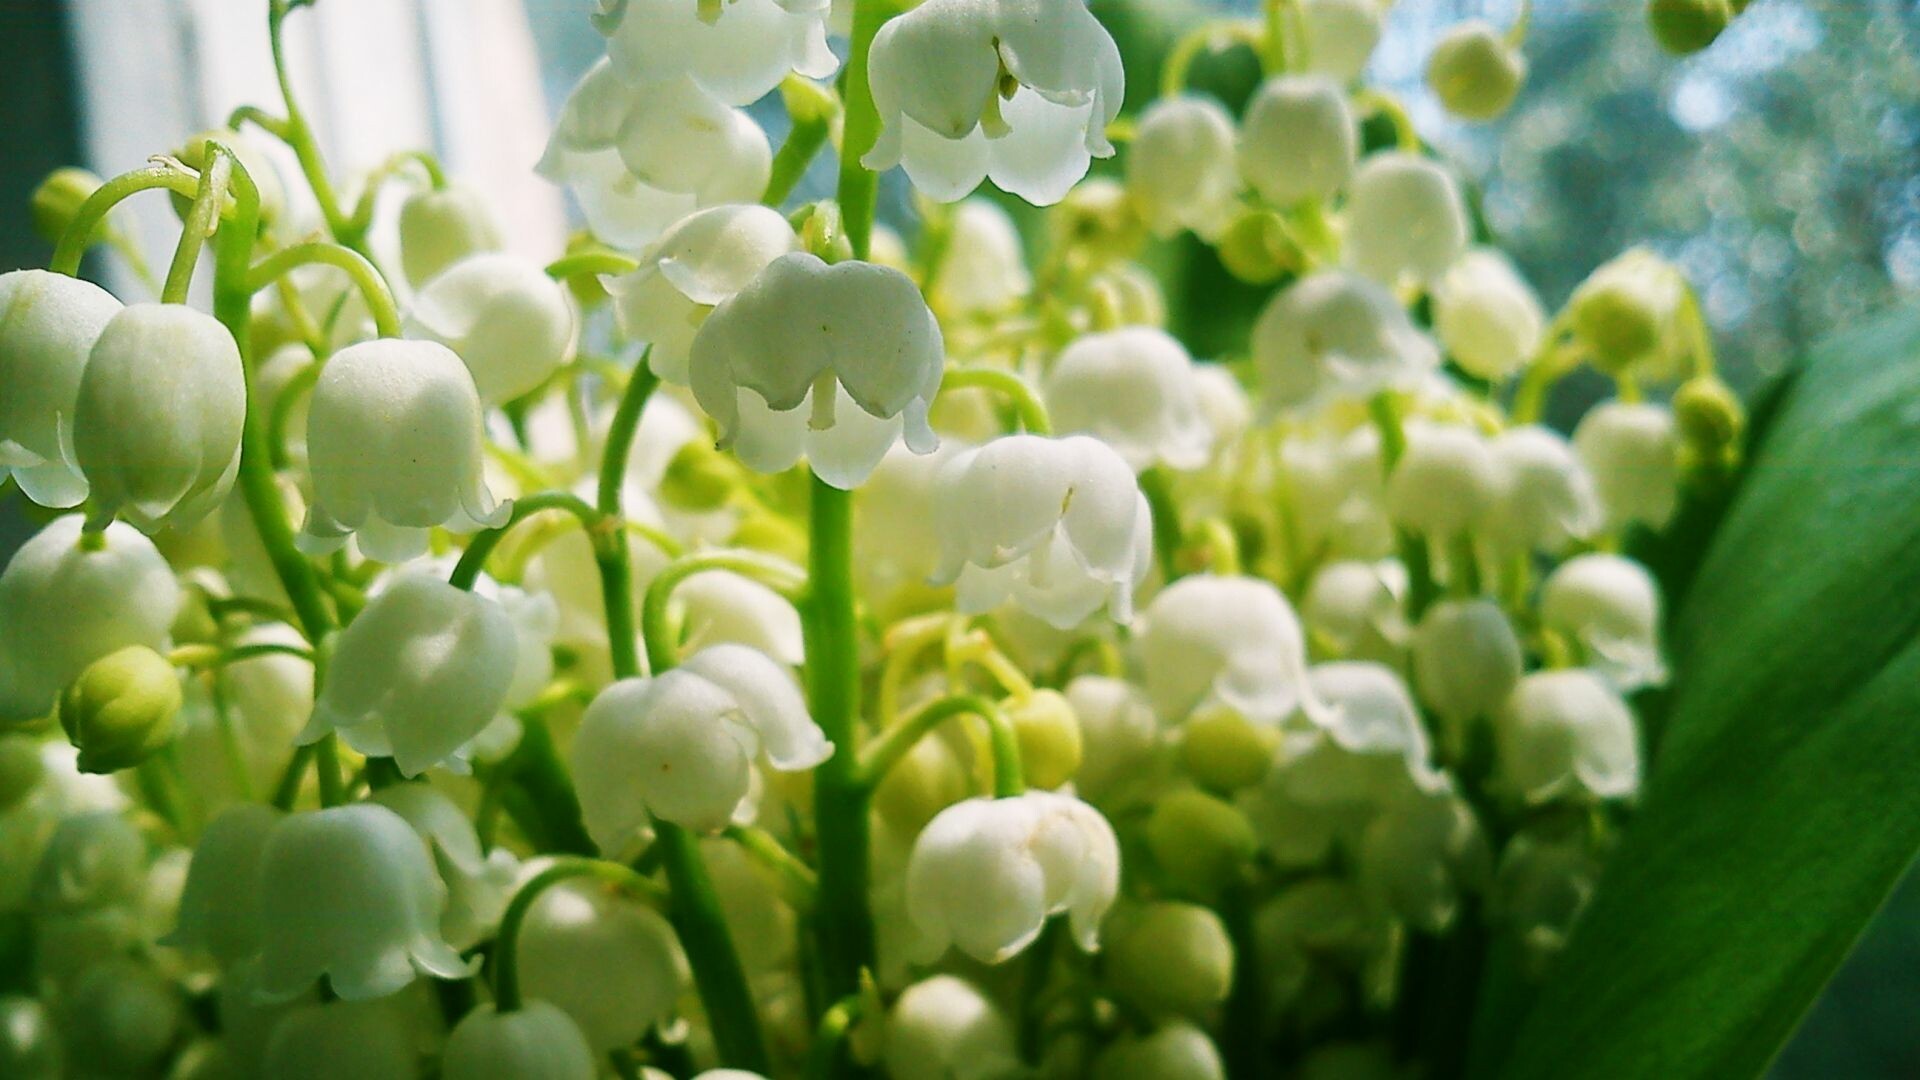 Lily of the Valley: Erect racemes of nodding, bell-shaped, fragrant white flowers arise with the paired, elliptic leaves. 1920x1080 Full HD Background.